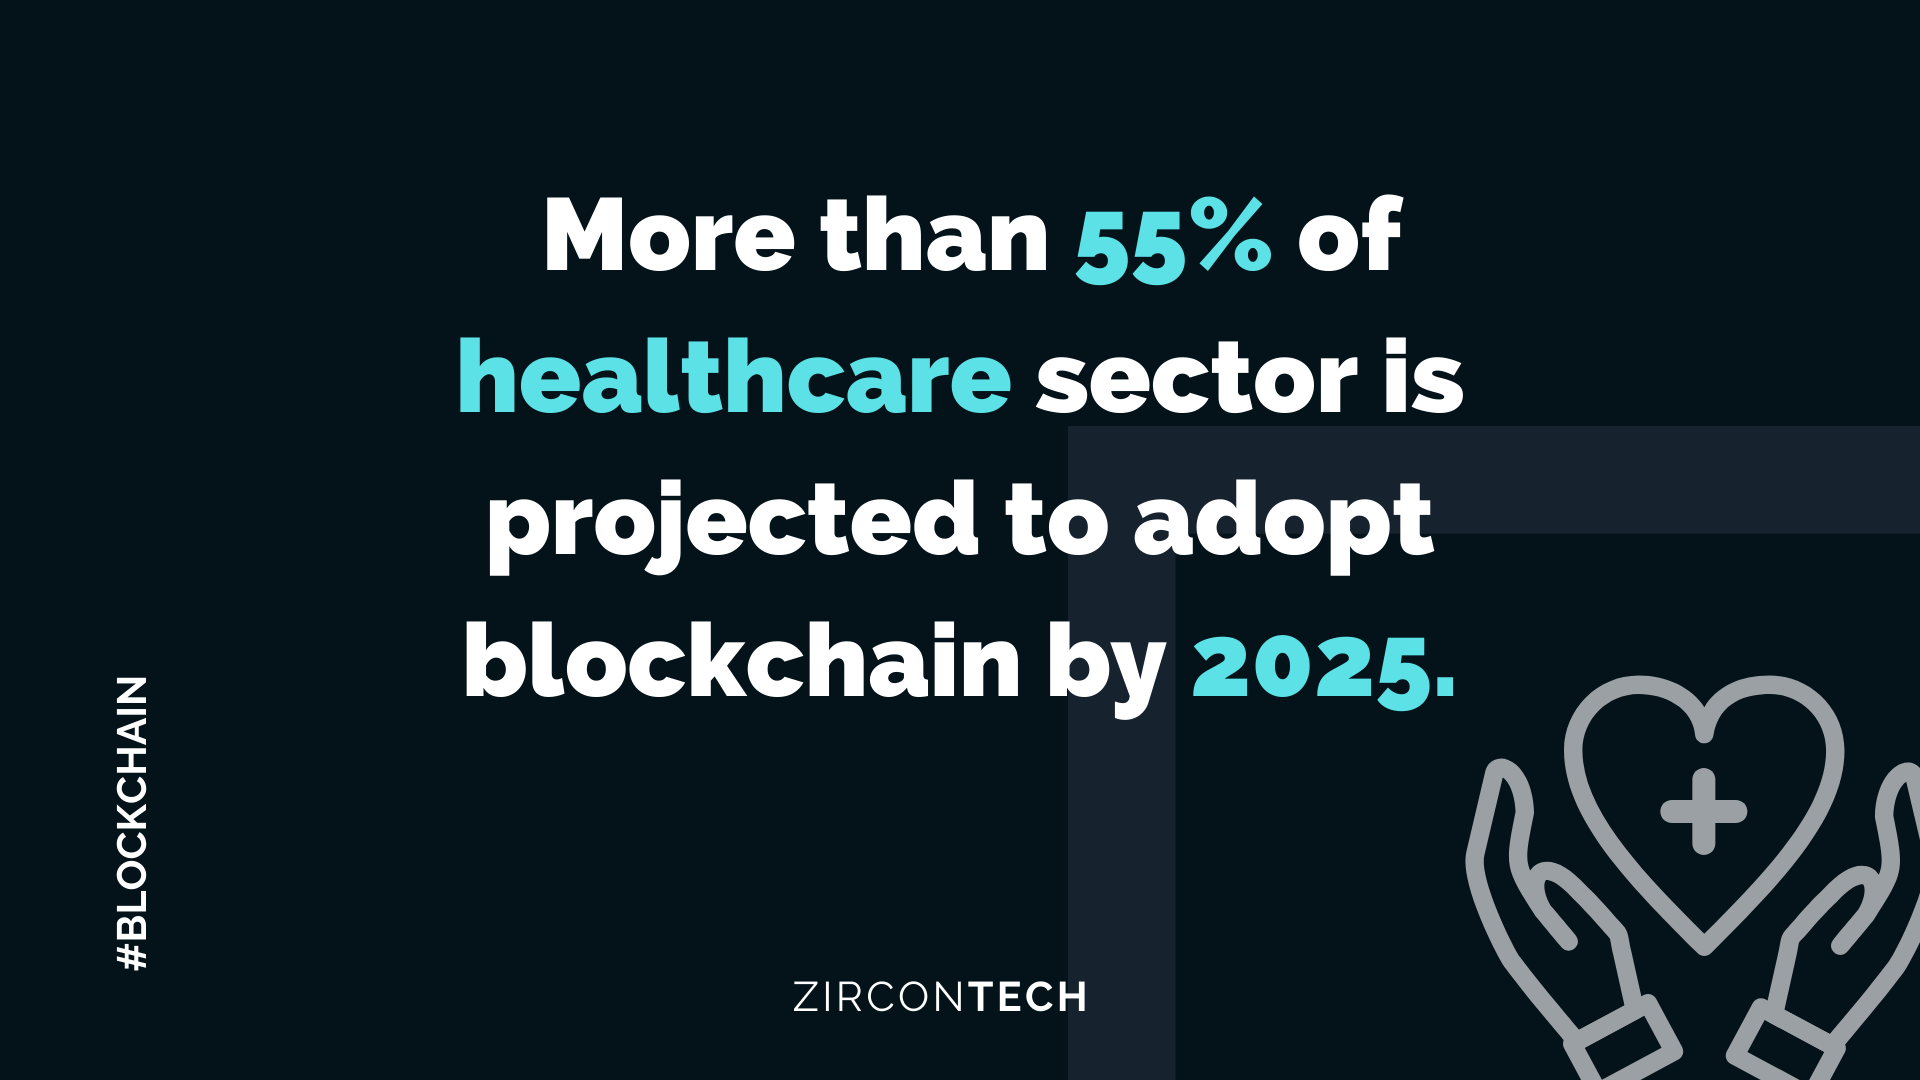 More than 55% of healthcare sector is projected to adopt blockchain by 2025